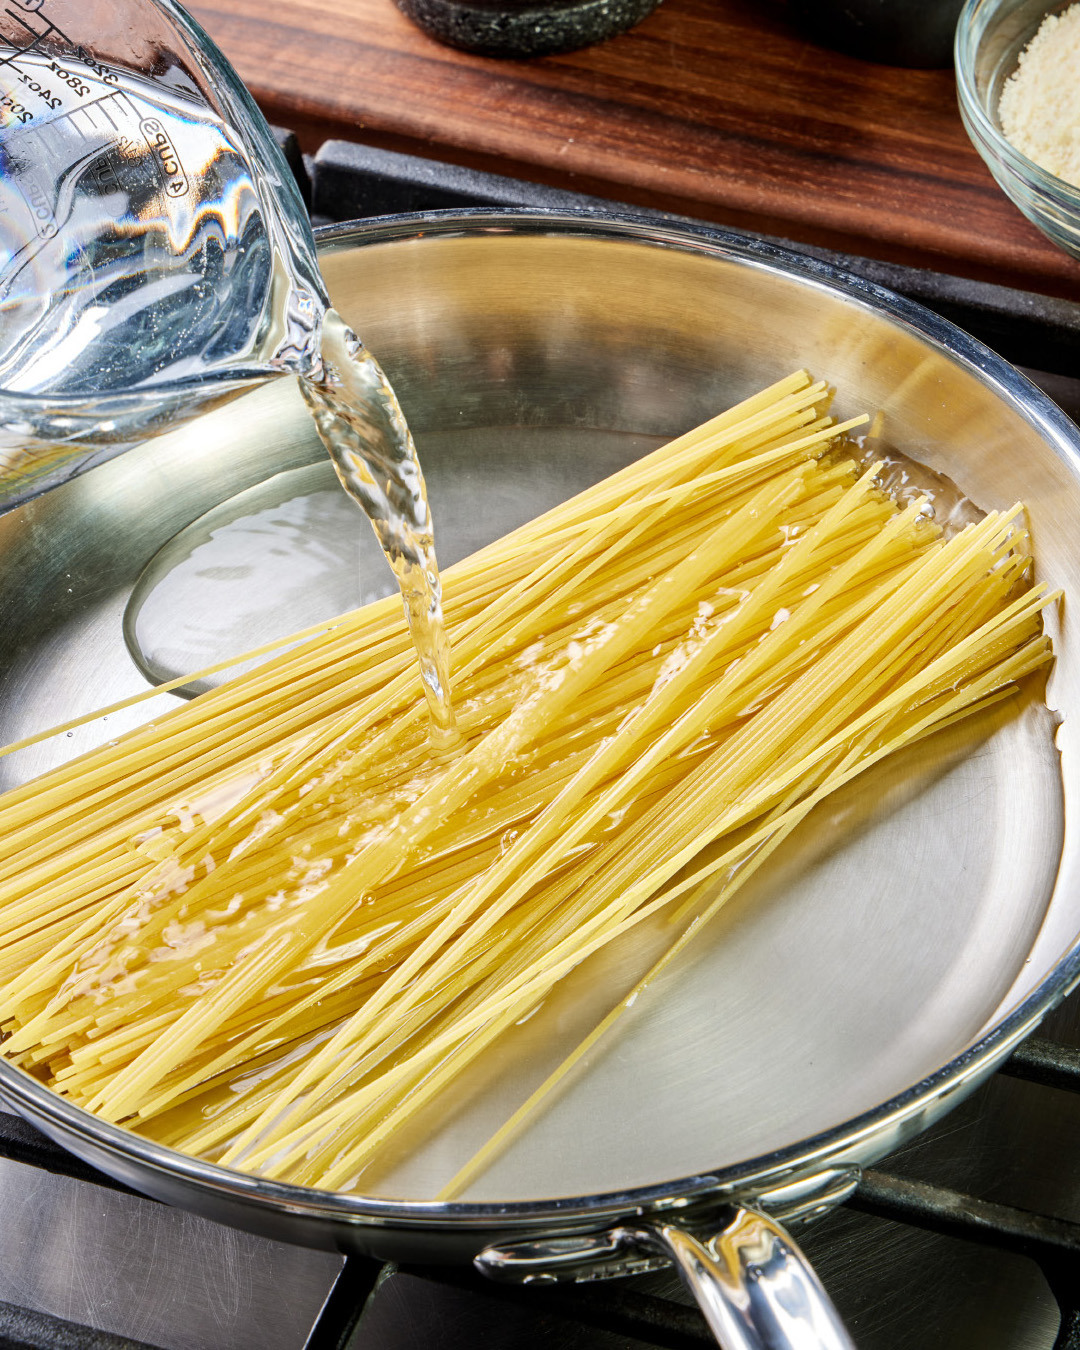 1. In a 12-inch skillet, add 12 ounces of bronze-cut spaghetti, placing the noodle strands parallel to each other in the center of the pan.